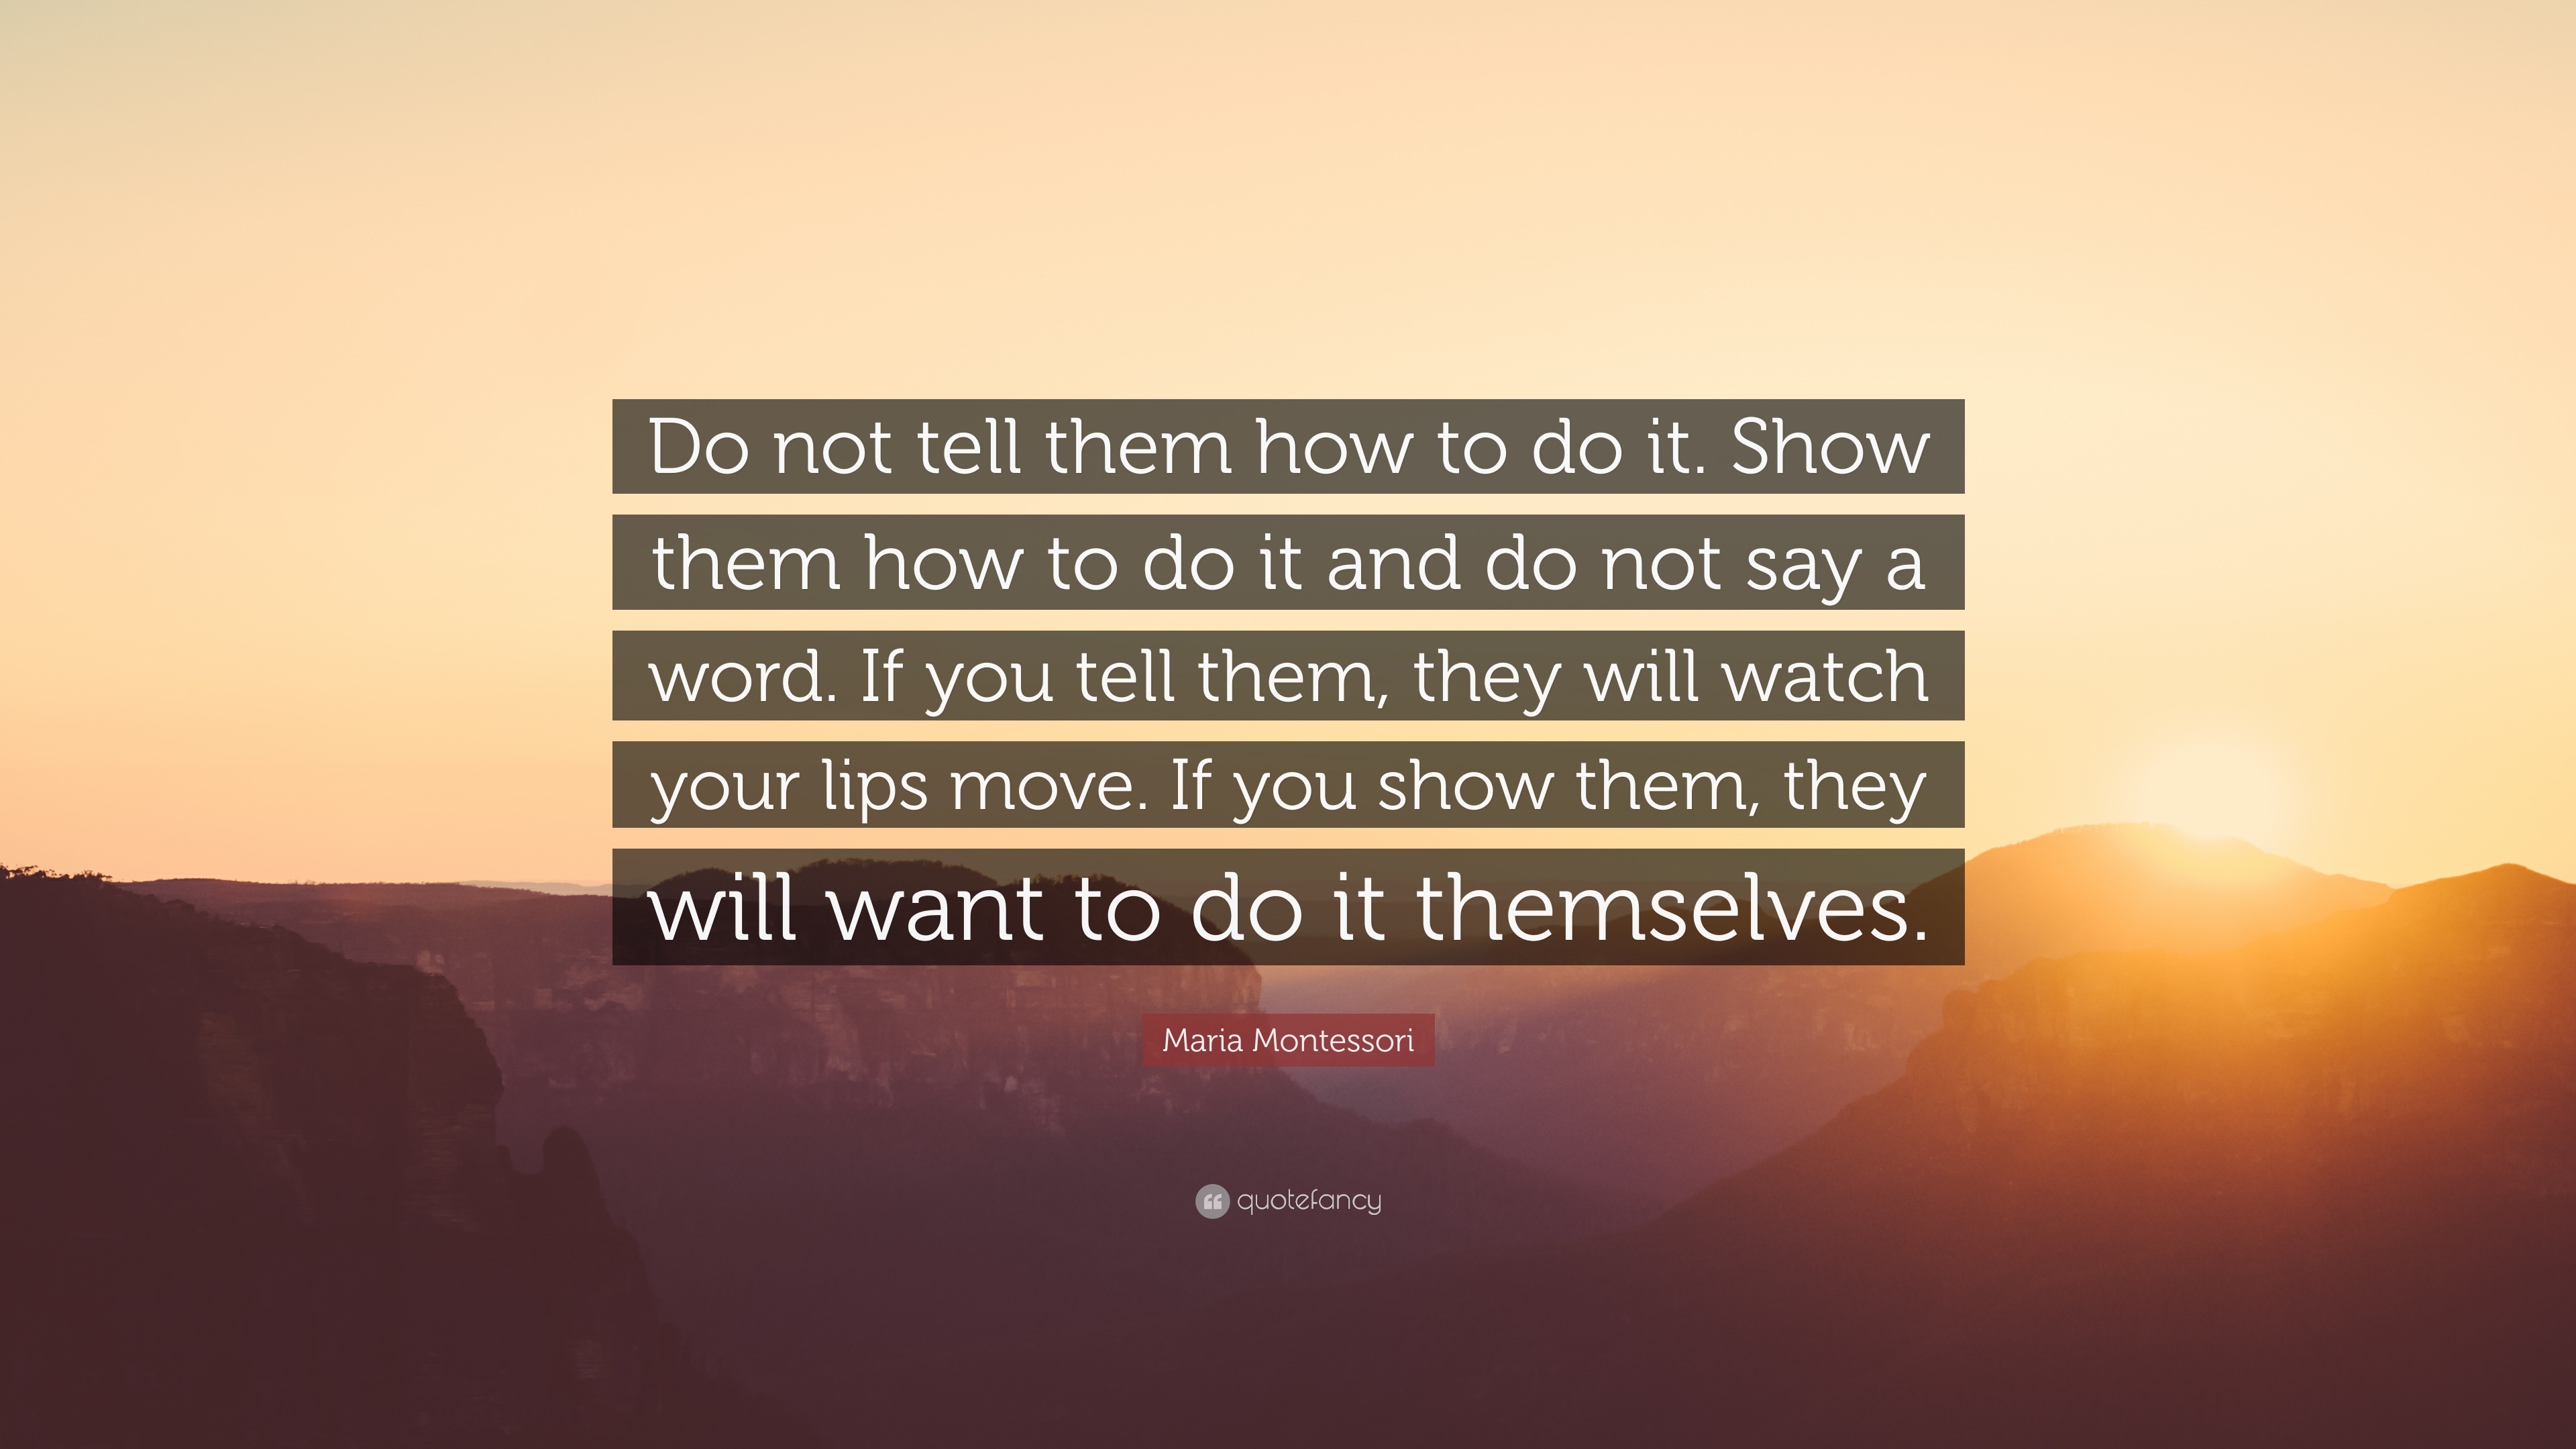 Maria Montessori Quote “Do not tell them how to do it. Show them how